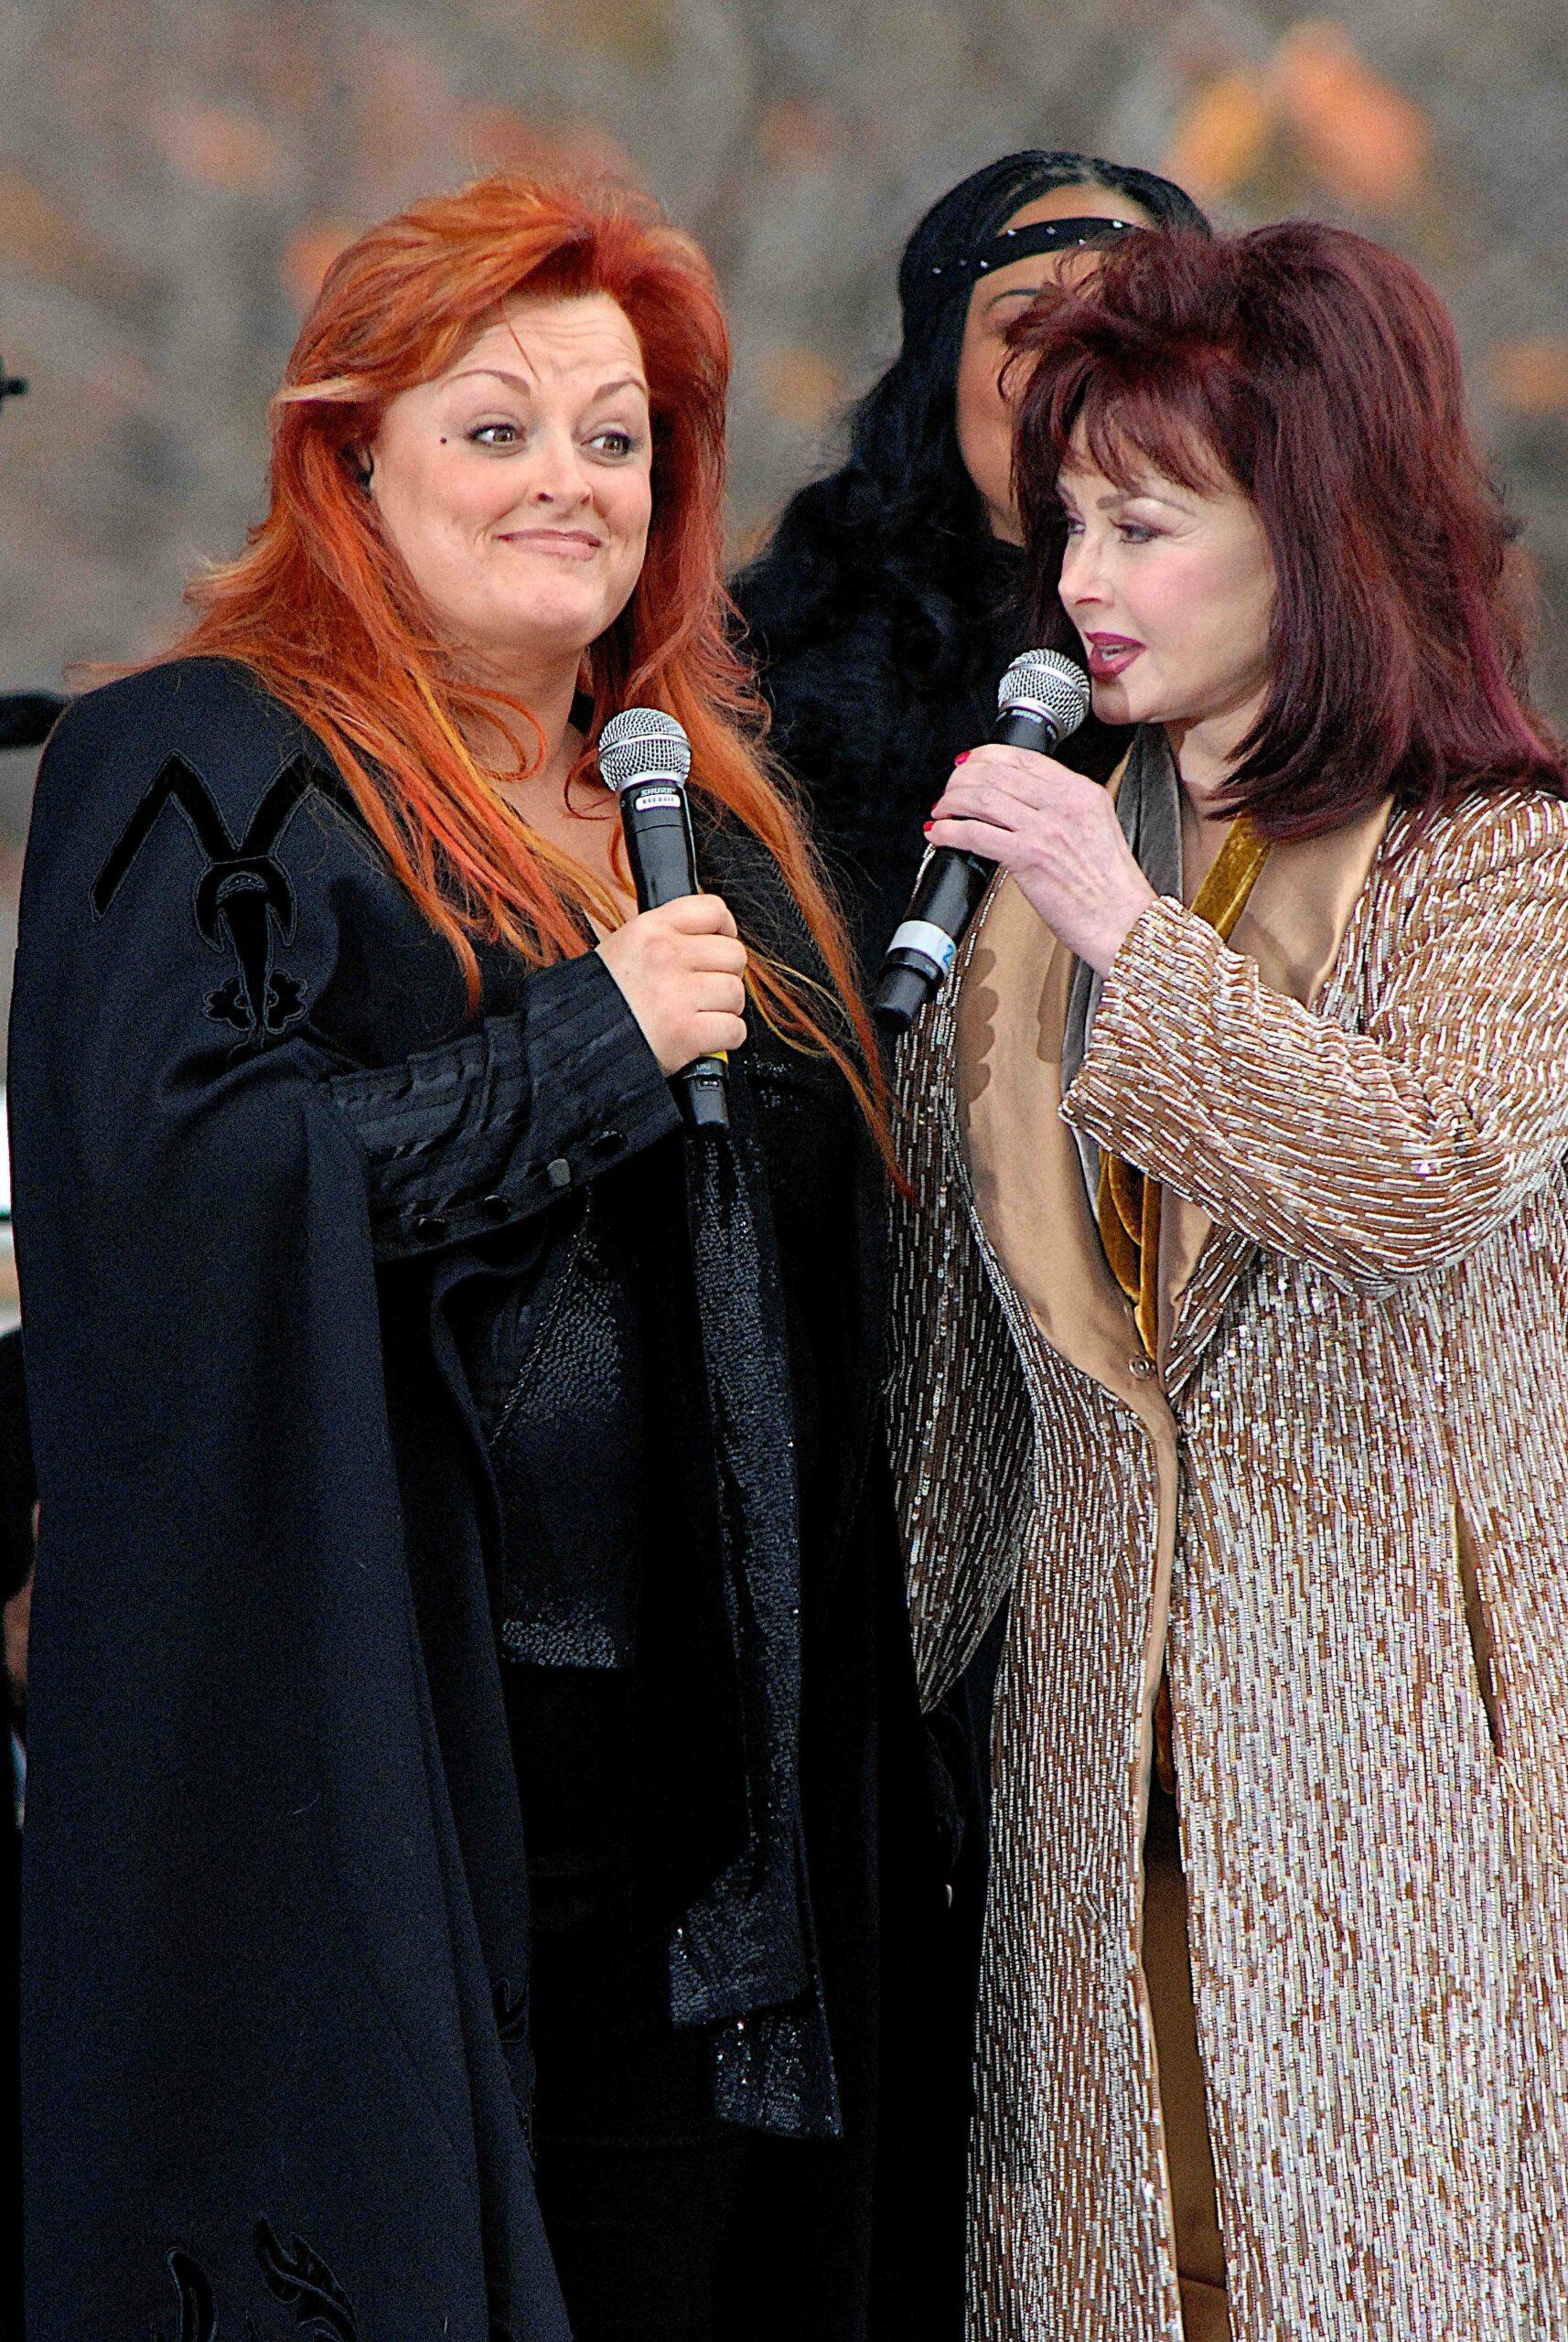 Naomi Judd Left A Suicide Note For Family, On Multiple Prescription Drugs During Death